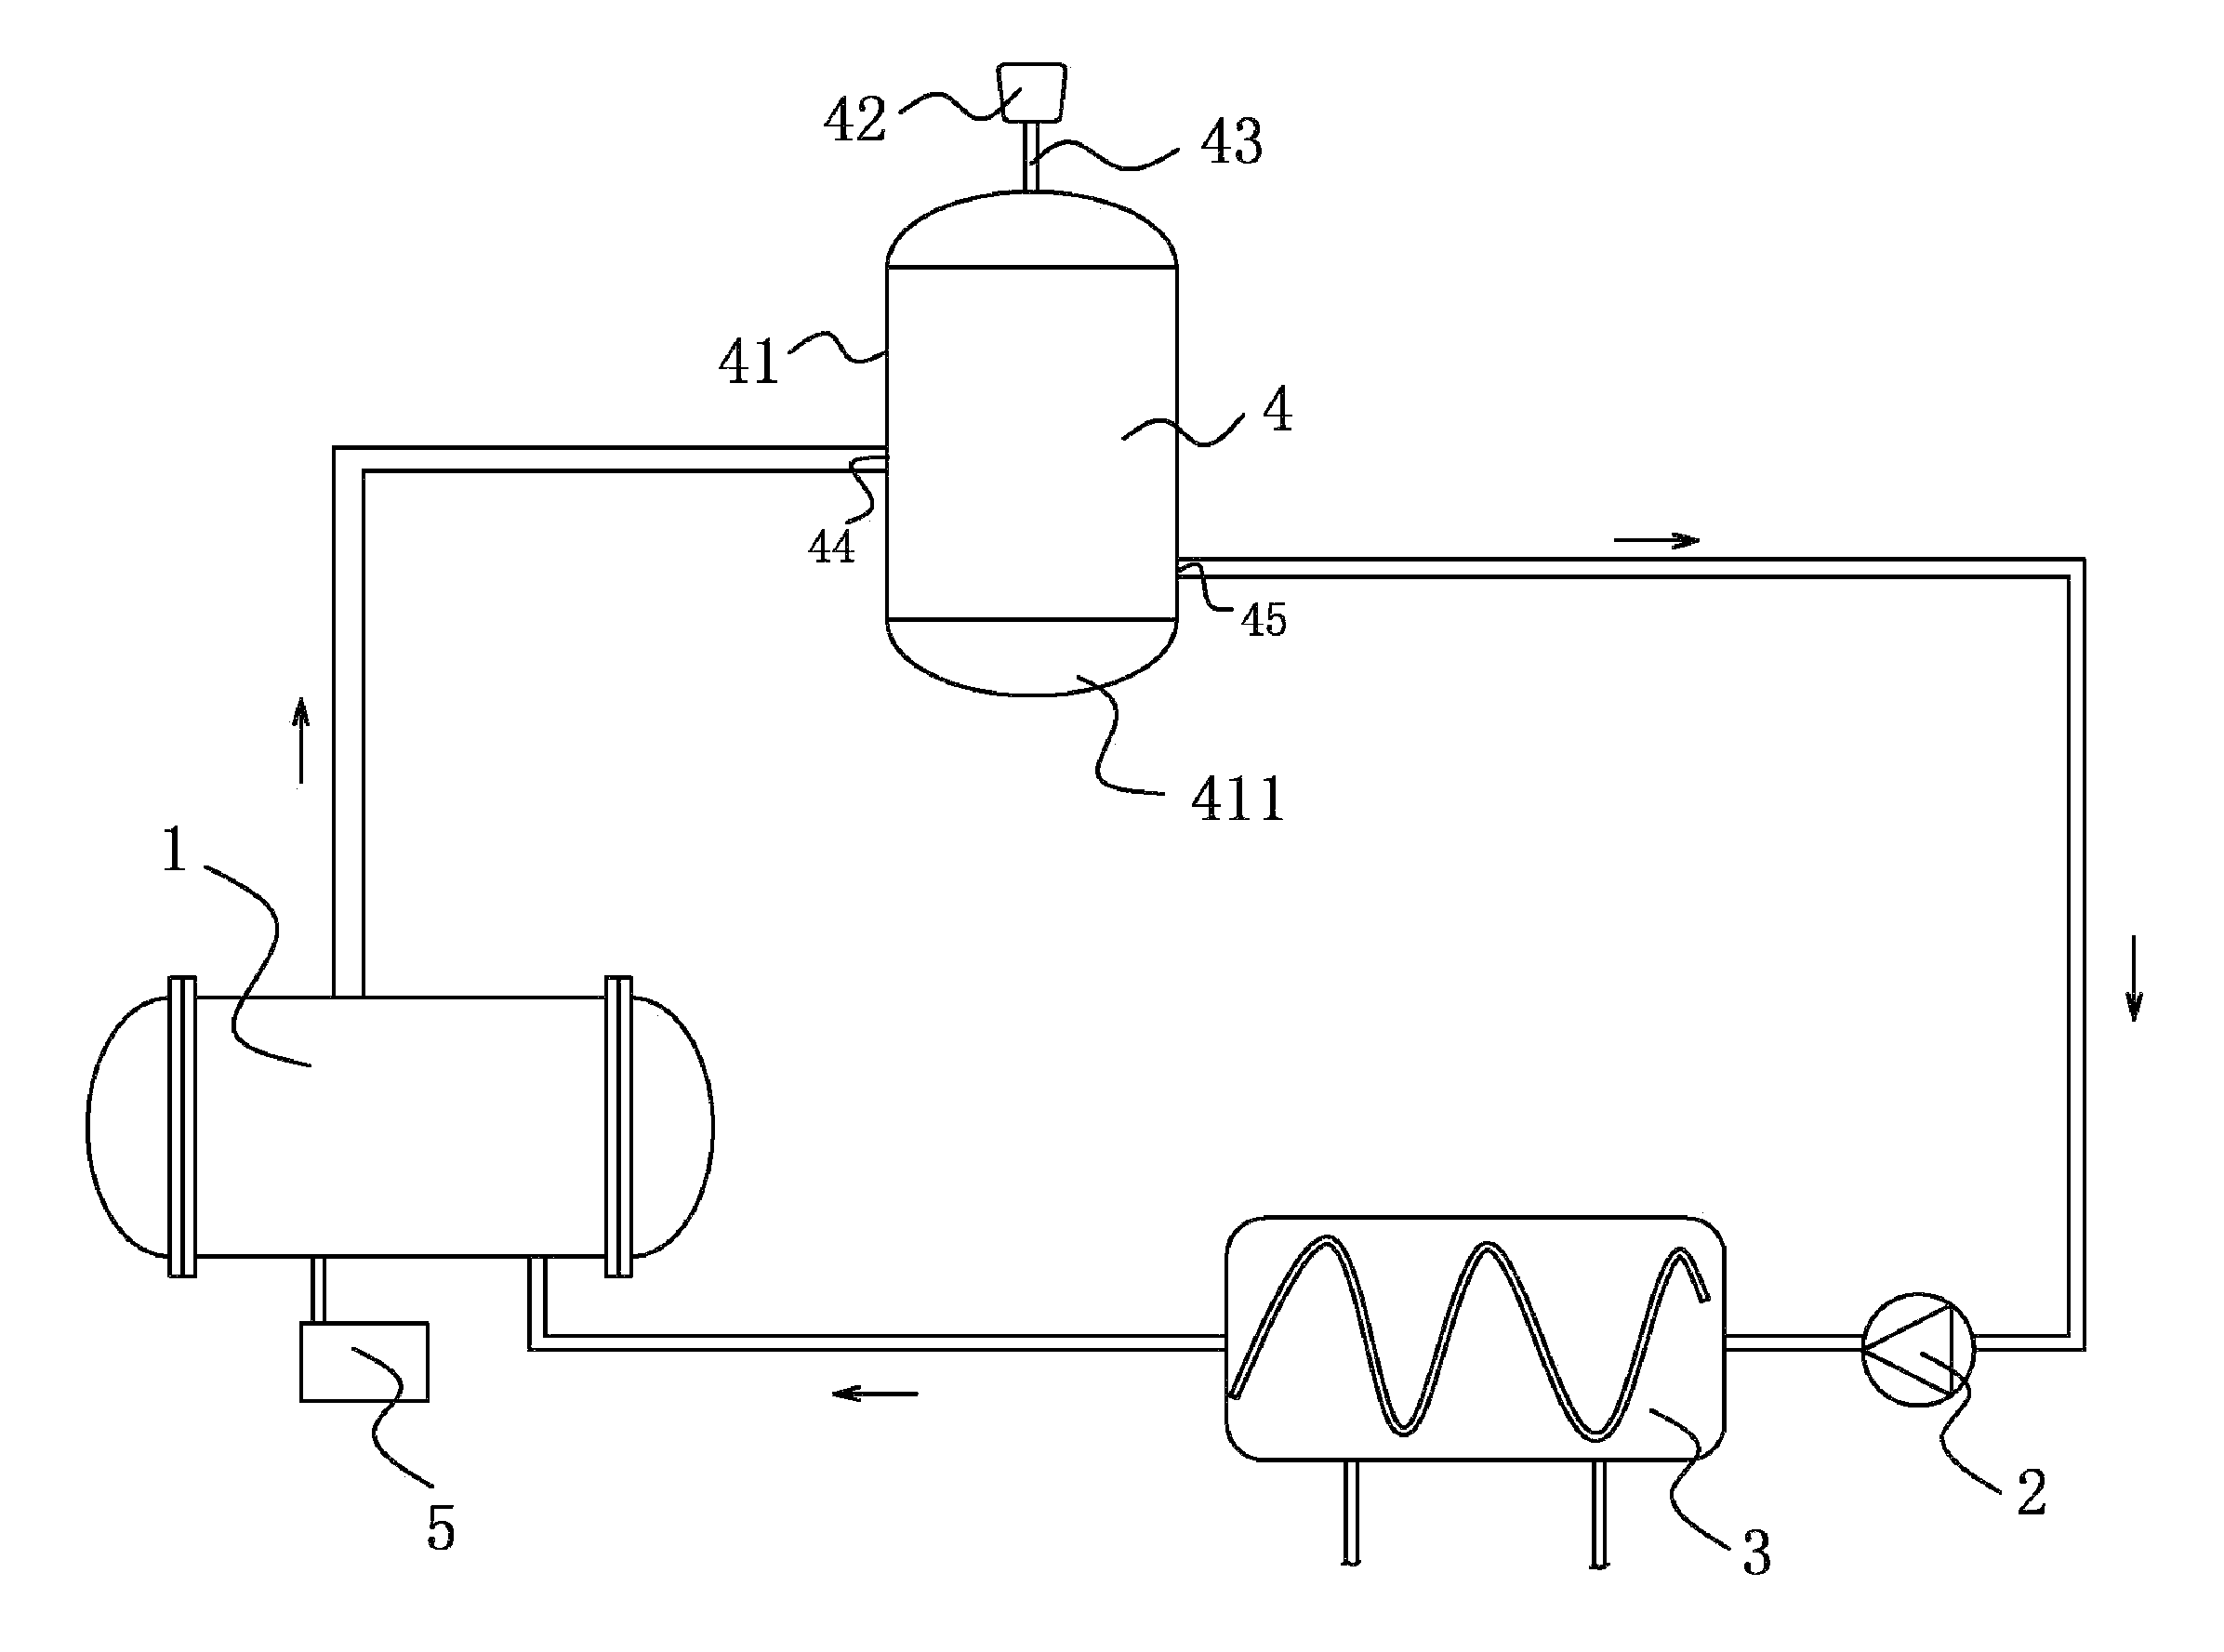 Exhaust gas expansion tank and ozone generator system applying the same